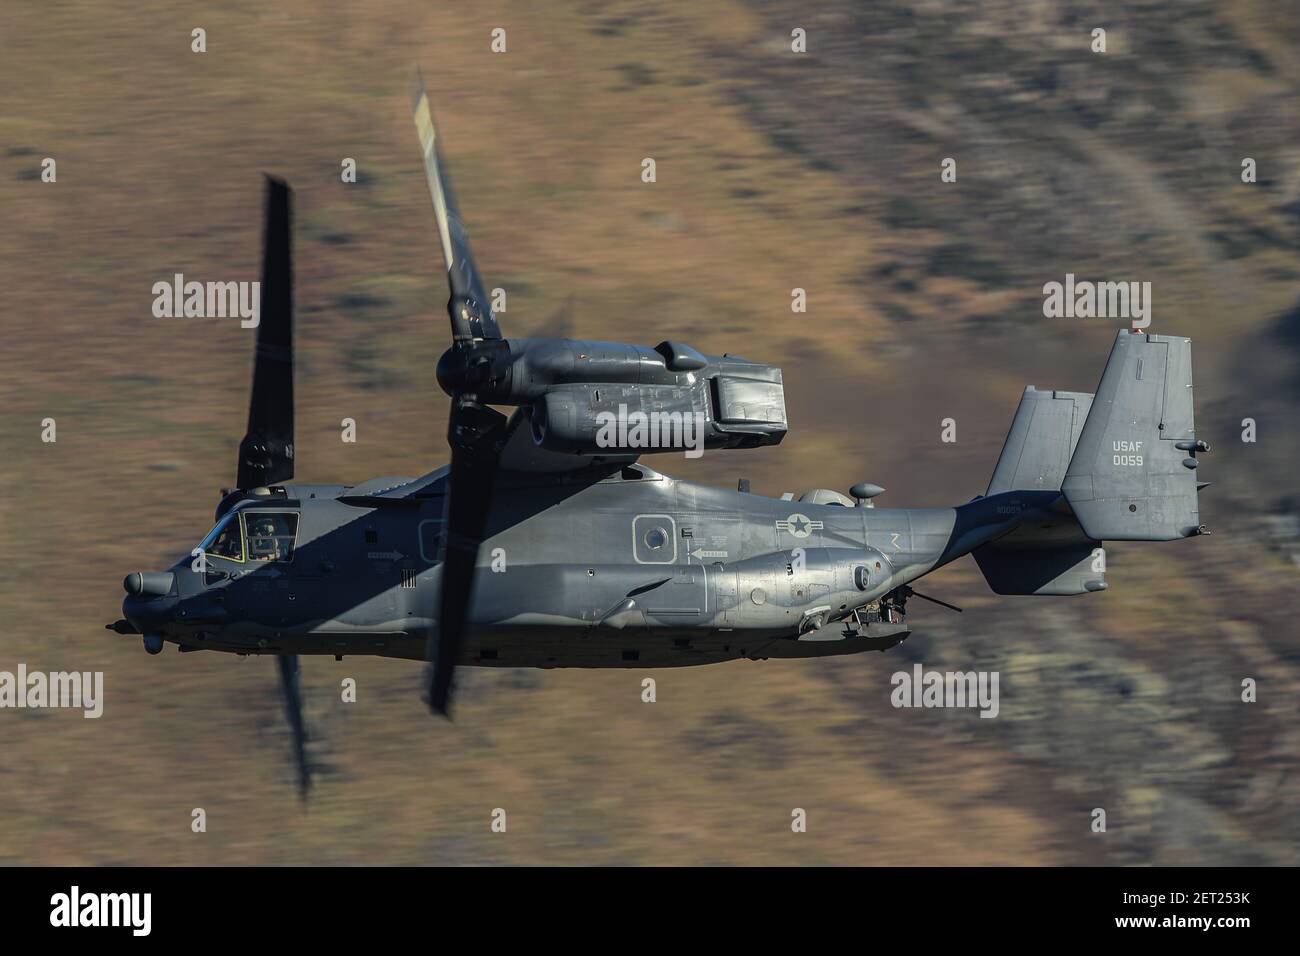 Thirlmere reservoir, near Keswick, The Lake District, Cumbria, UK. 1st March, 2021. A USAF Bell Boeing V-22 Osprey during low level training sorties over Thirlmere reservoir, near Keswick, The Lake District, Cumbria in Keswick, UK on 3/1/2021. (Photo by Mark Cosgrove/News Images/Sipa USA) Credit: Sipa USA/Alamy Live News Credit: Sipa USA/Alamy Live News Stock Photo